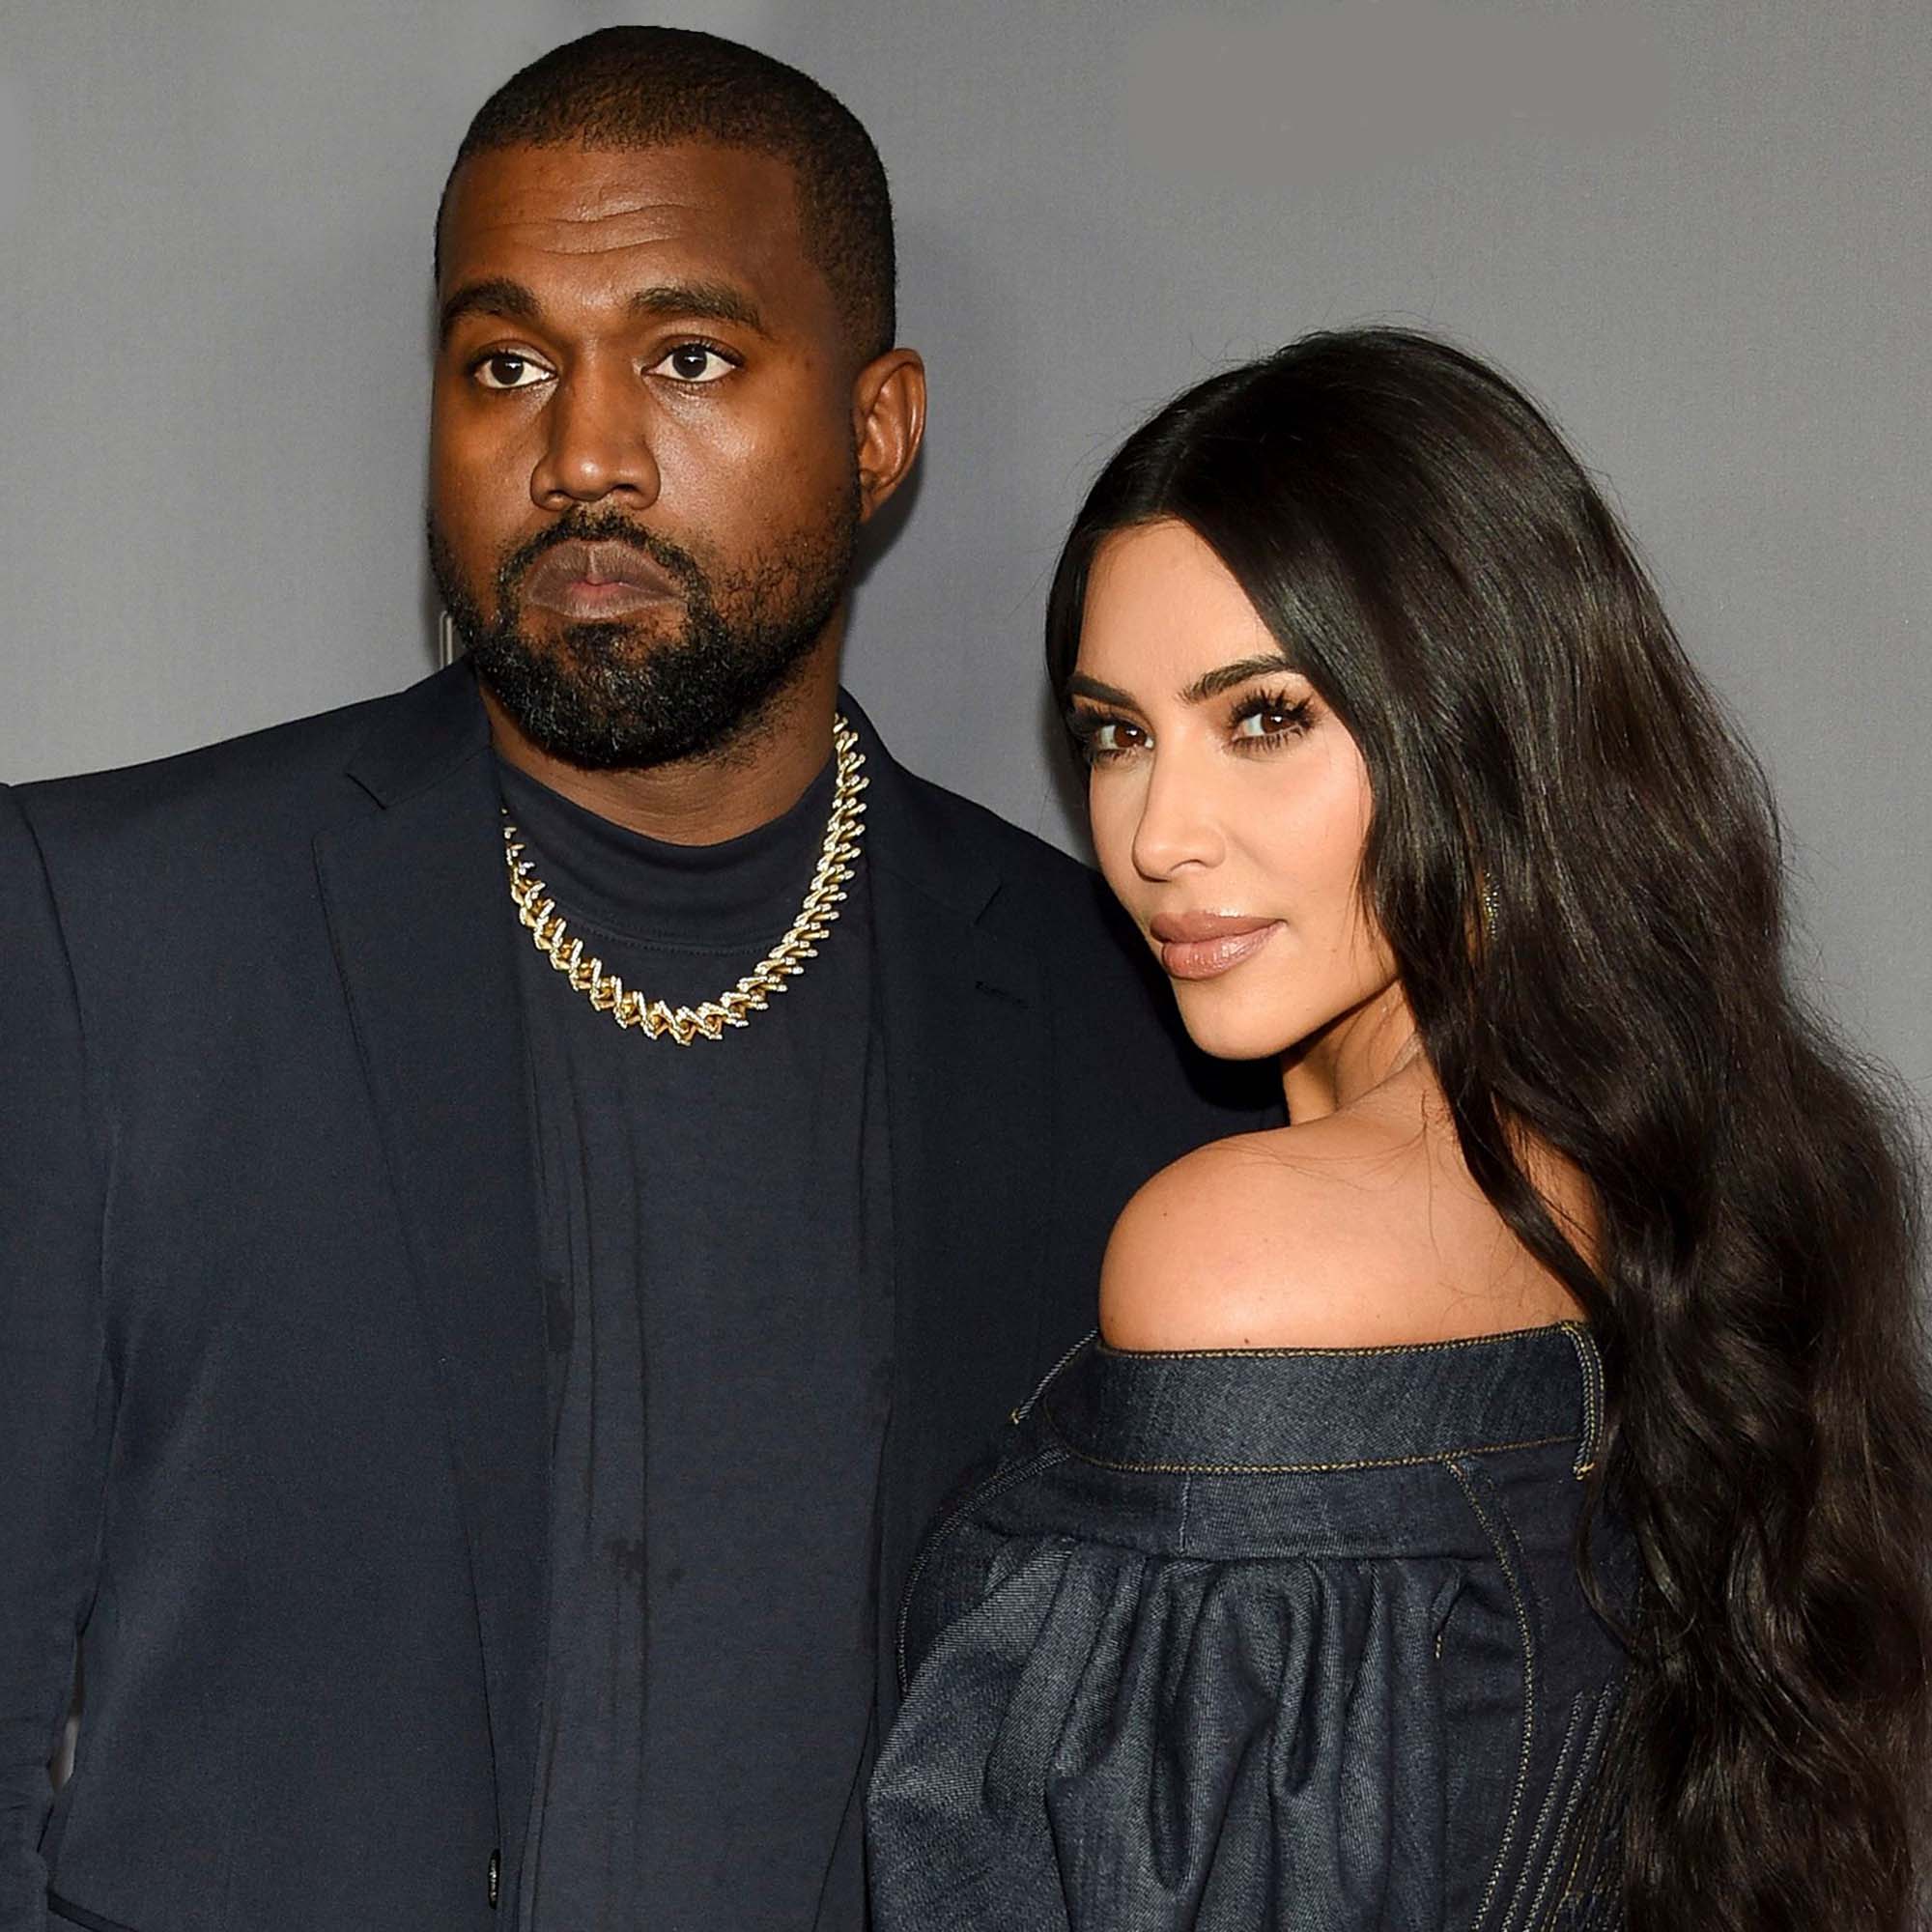 Here's How Kim Kardashian and Kanye West Are Dividing Their Many